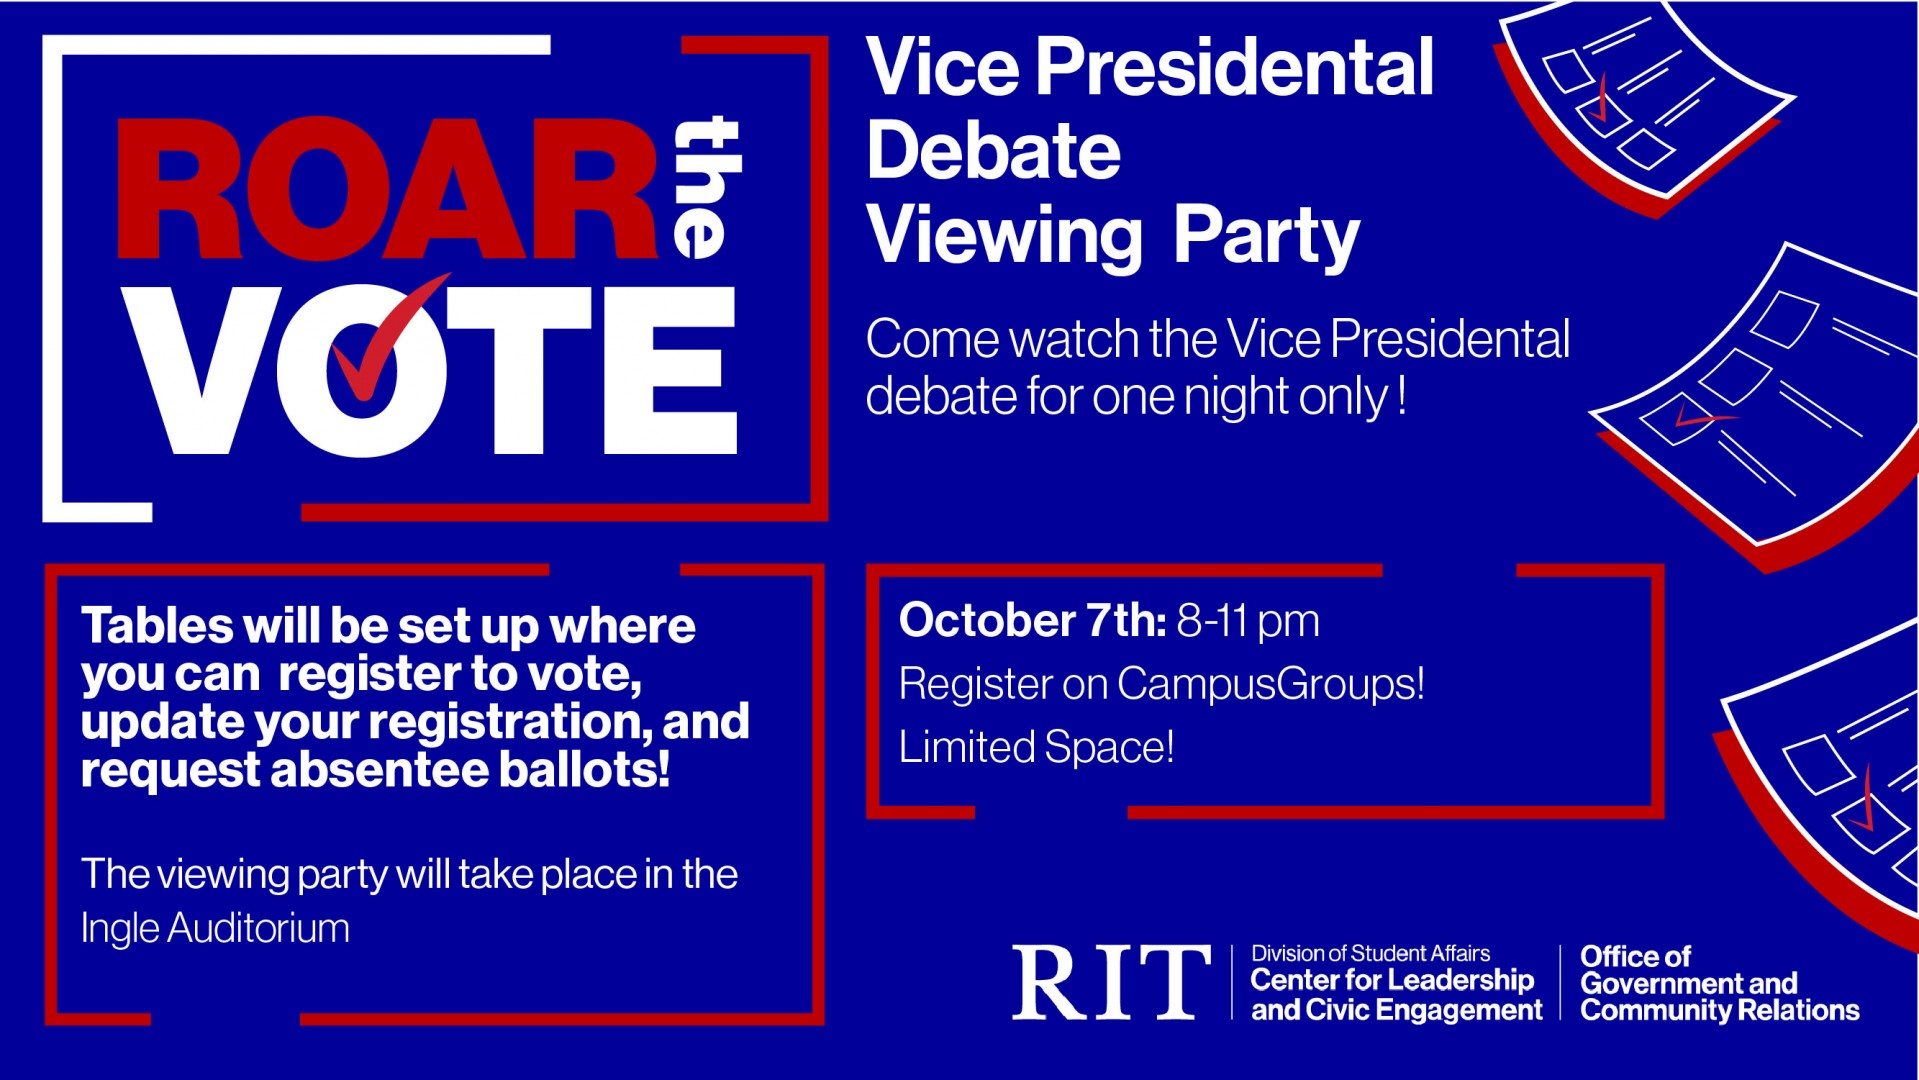 Come watch the vice presidential debate! Join ROAR the Vote and Government & Community Relations as we screen the vice presidential debate in Ingle Auditorium. You can also register to vote and request an absentee ballot!  The debate is scheduled to start at 9pm.  Masks are required. We have requested ASL interpreters and will screen the debate with captions (if available).